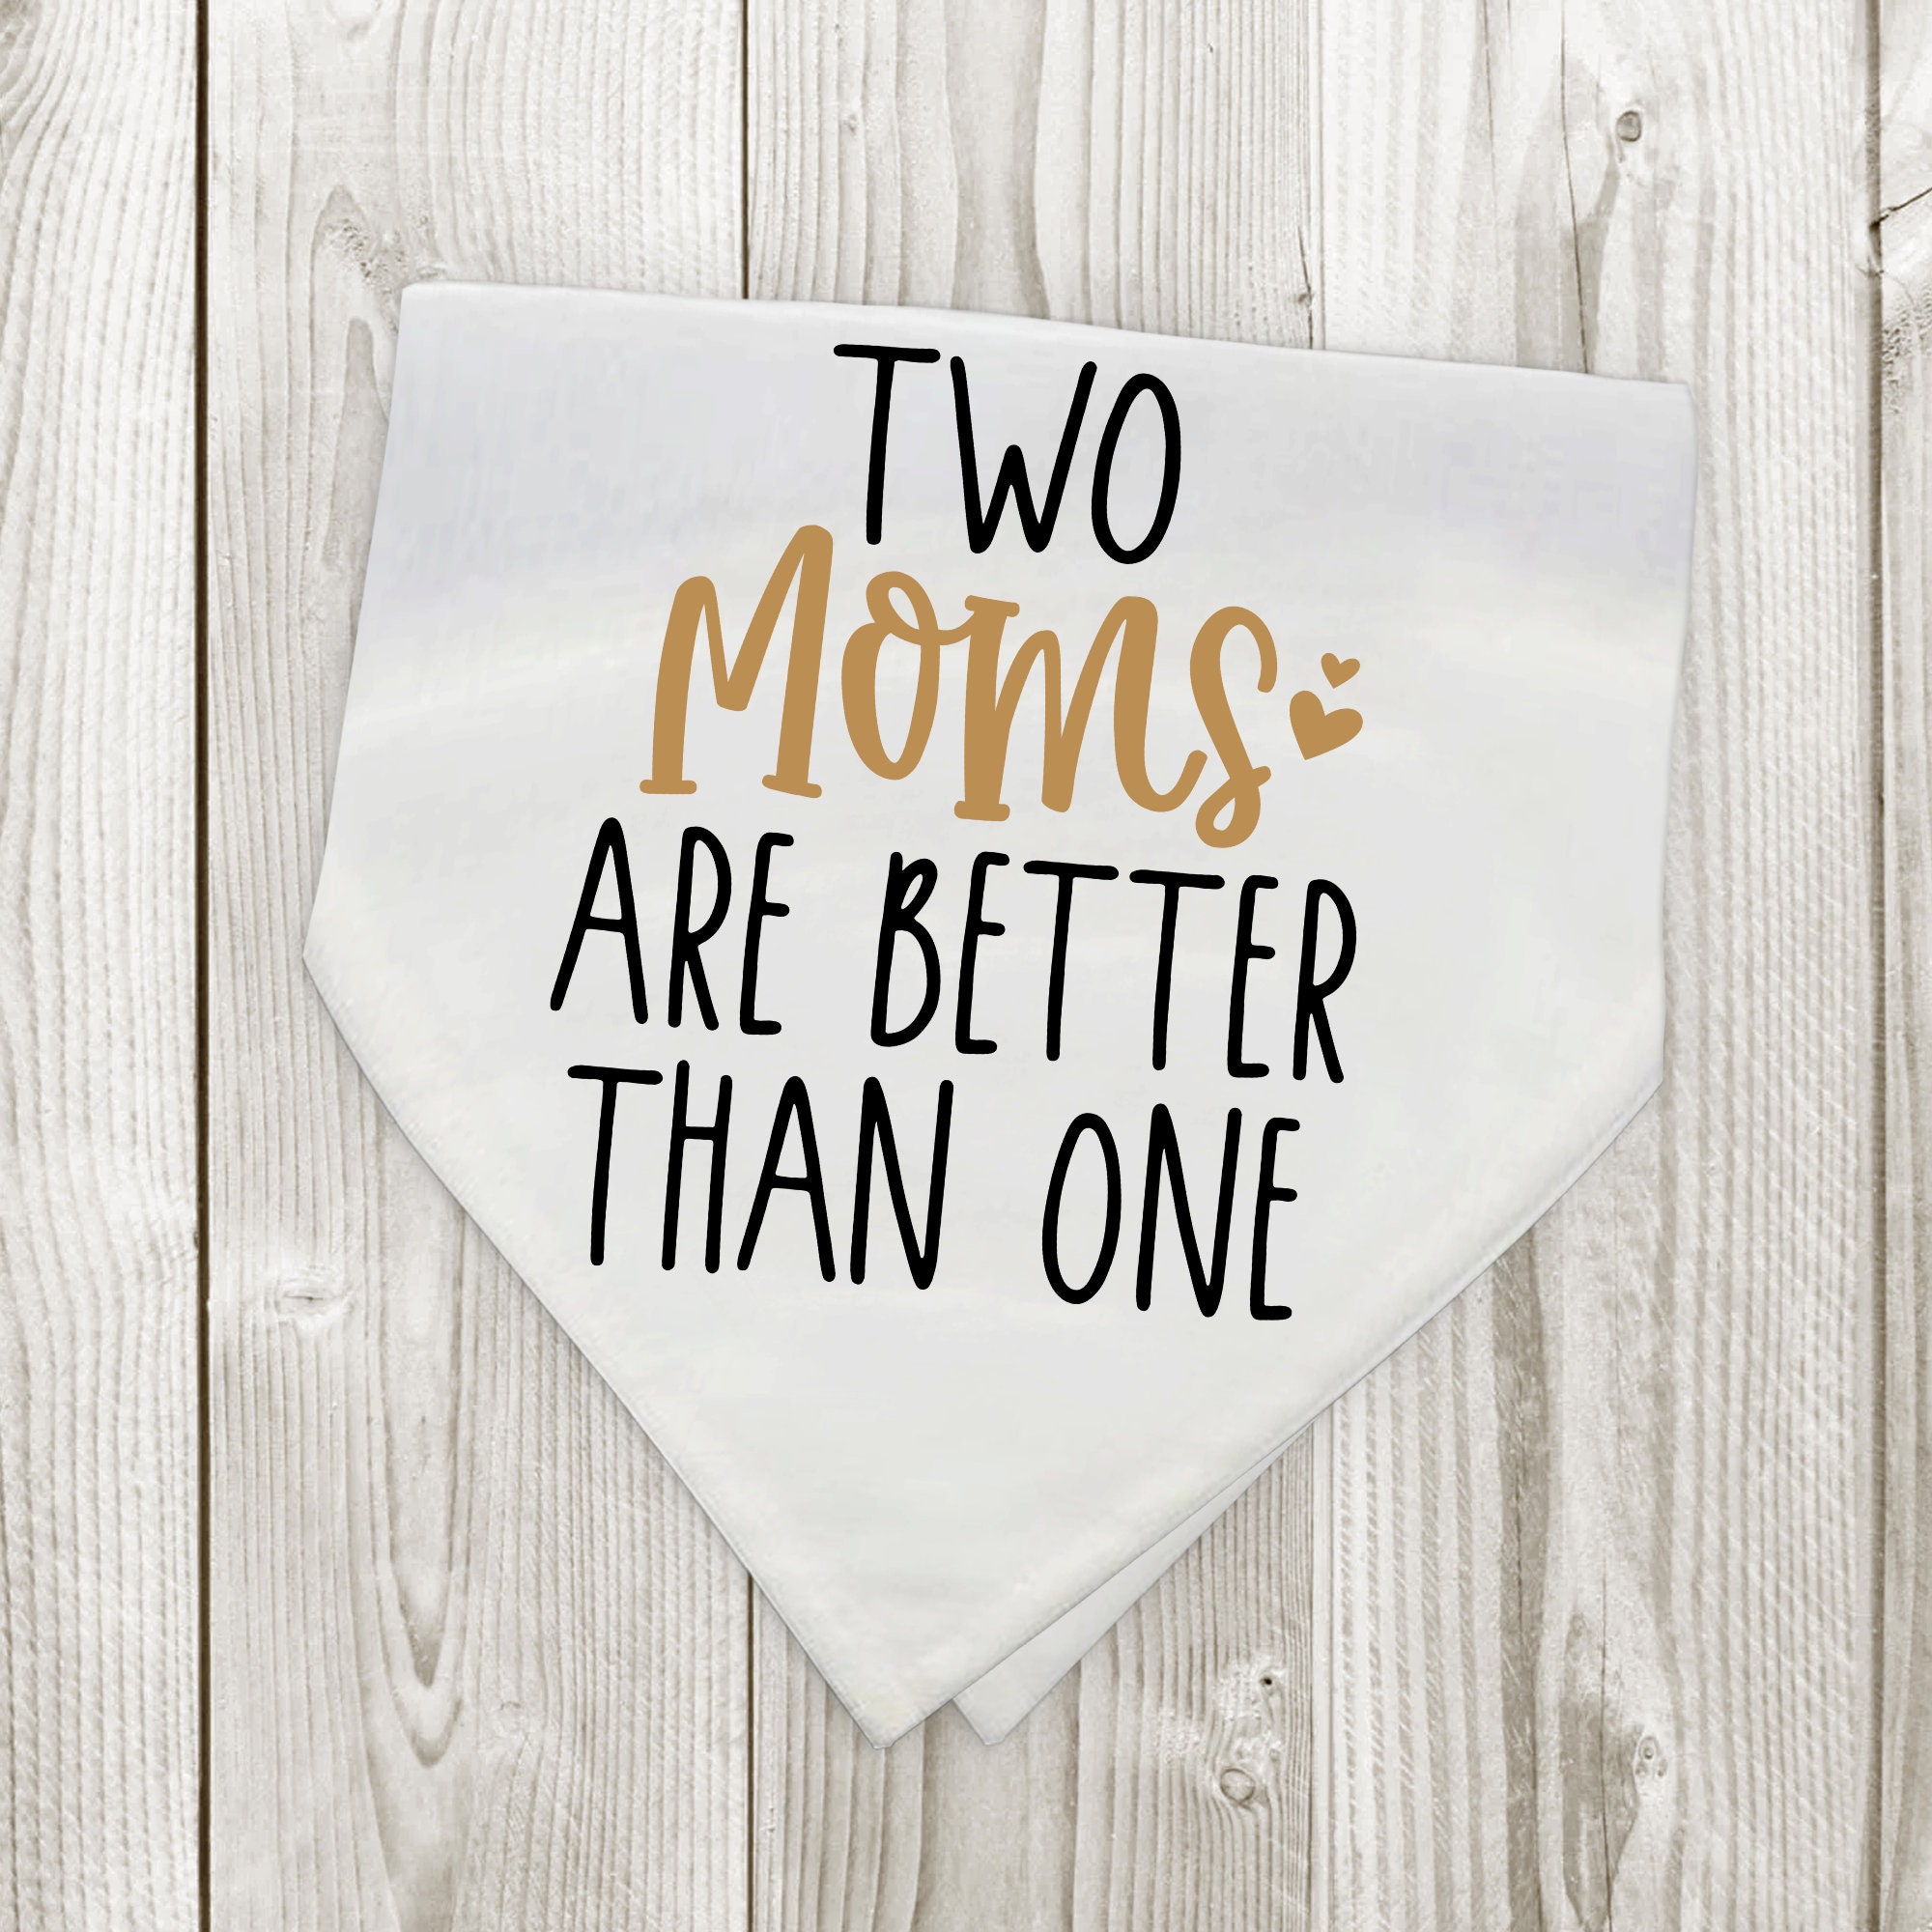 Two Moms Are Better Than One Same Sex Marriage Lesbian image